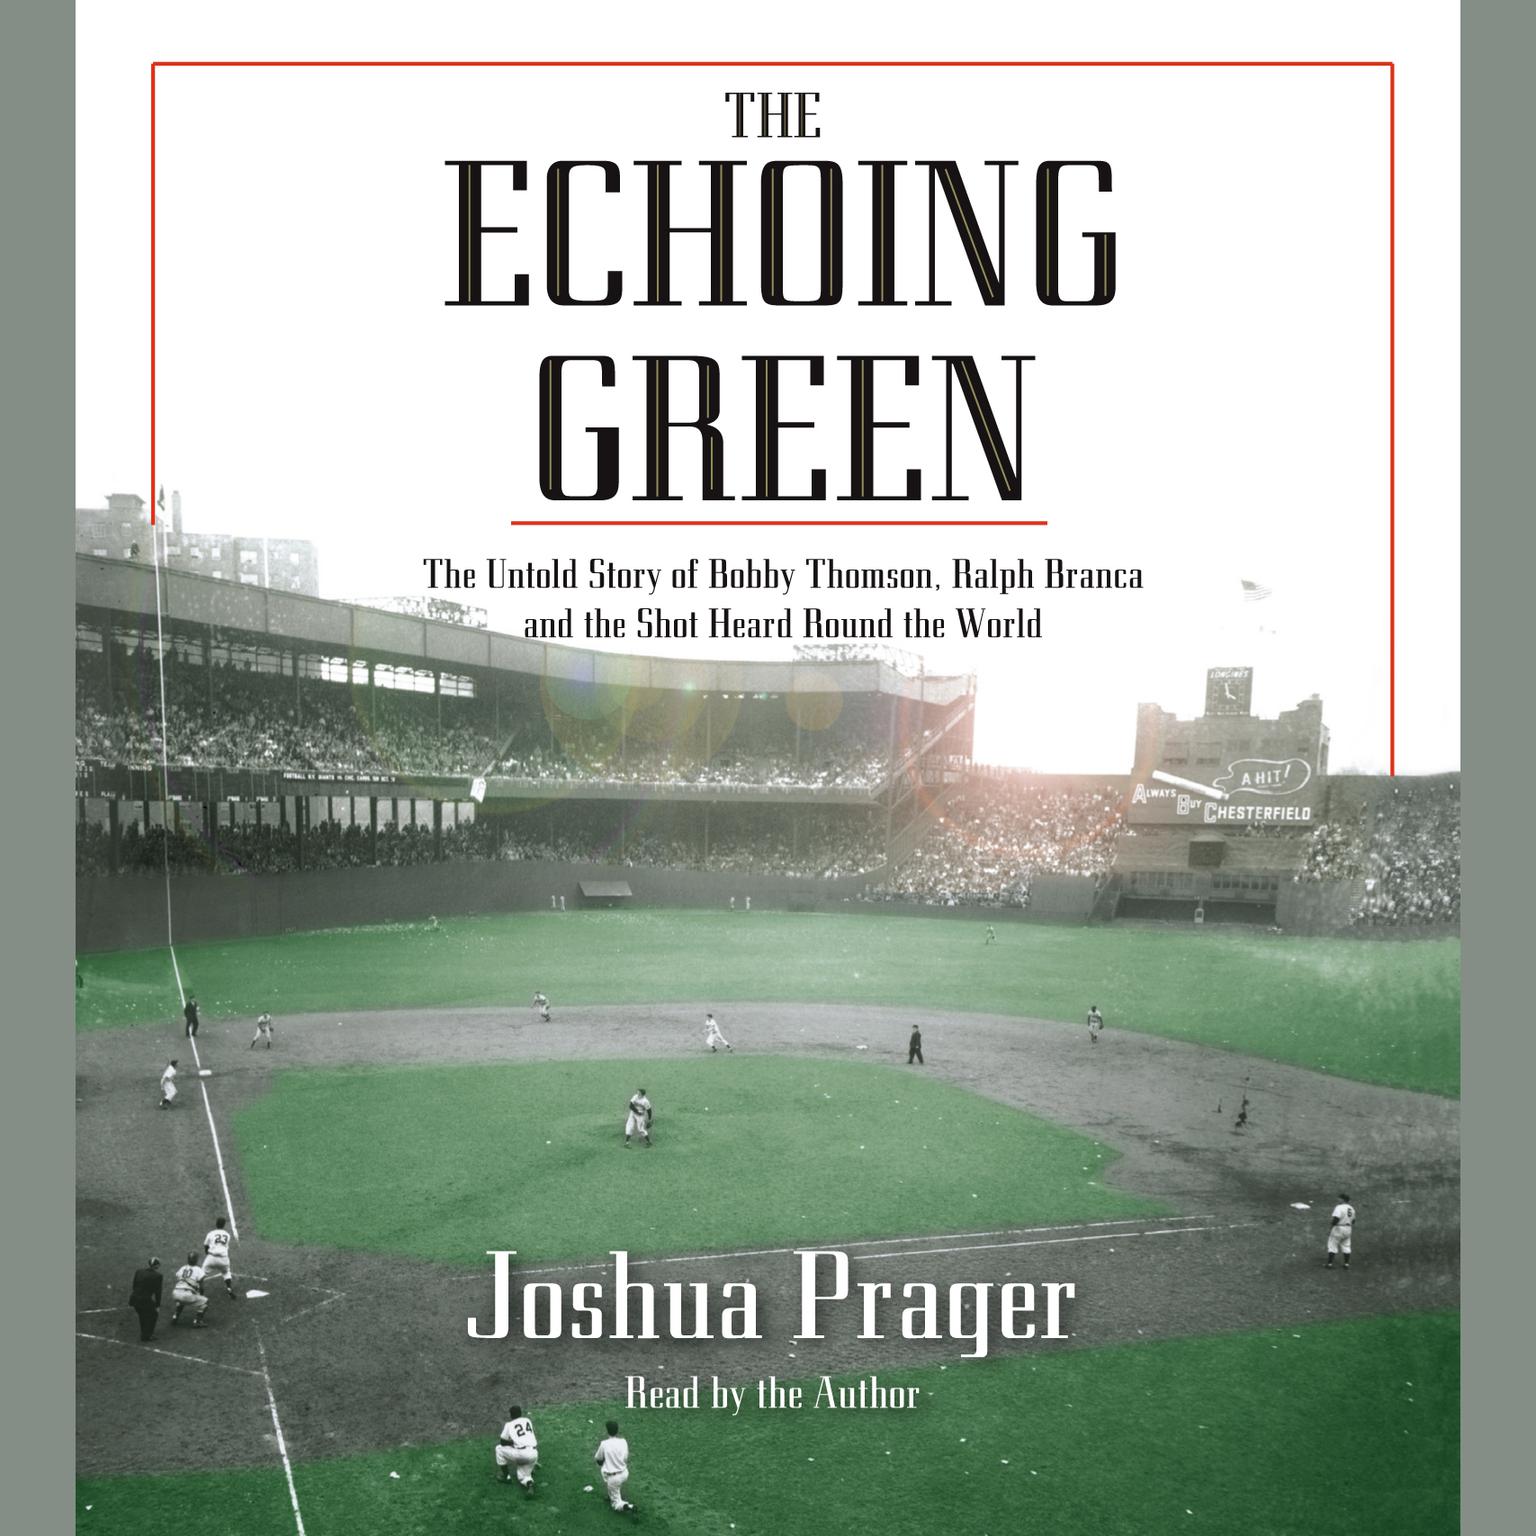 The Echoing Green (Abridged): The Untold Story of Bobby Thomson, Ralph Branca, and the Shot Heard Round the World Audiobook, by Joshua Prager